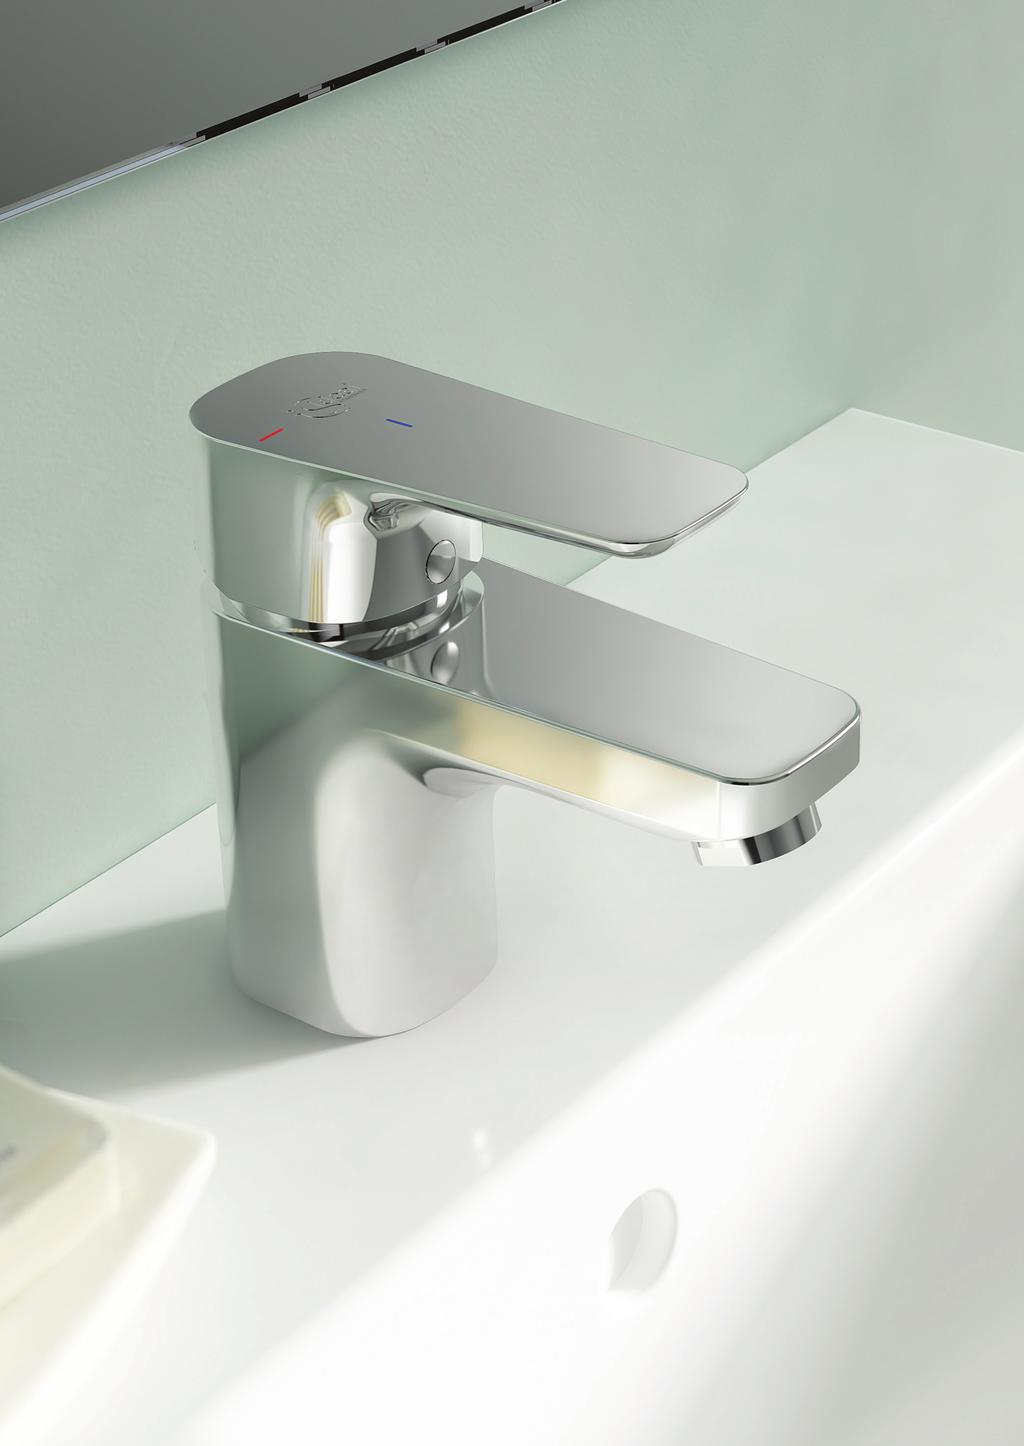 SAVE WATER & ENERGY BLUESTART TECHNOLOGY 100% 80% 60% Energy Savings 40% Water Energy 20% Water 0% Traditional Brassware Ceraplan III Brassware with Click Technology The Ceraplan III fittings feature